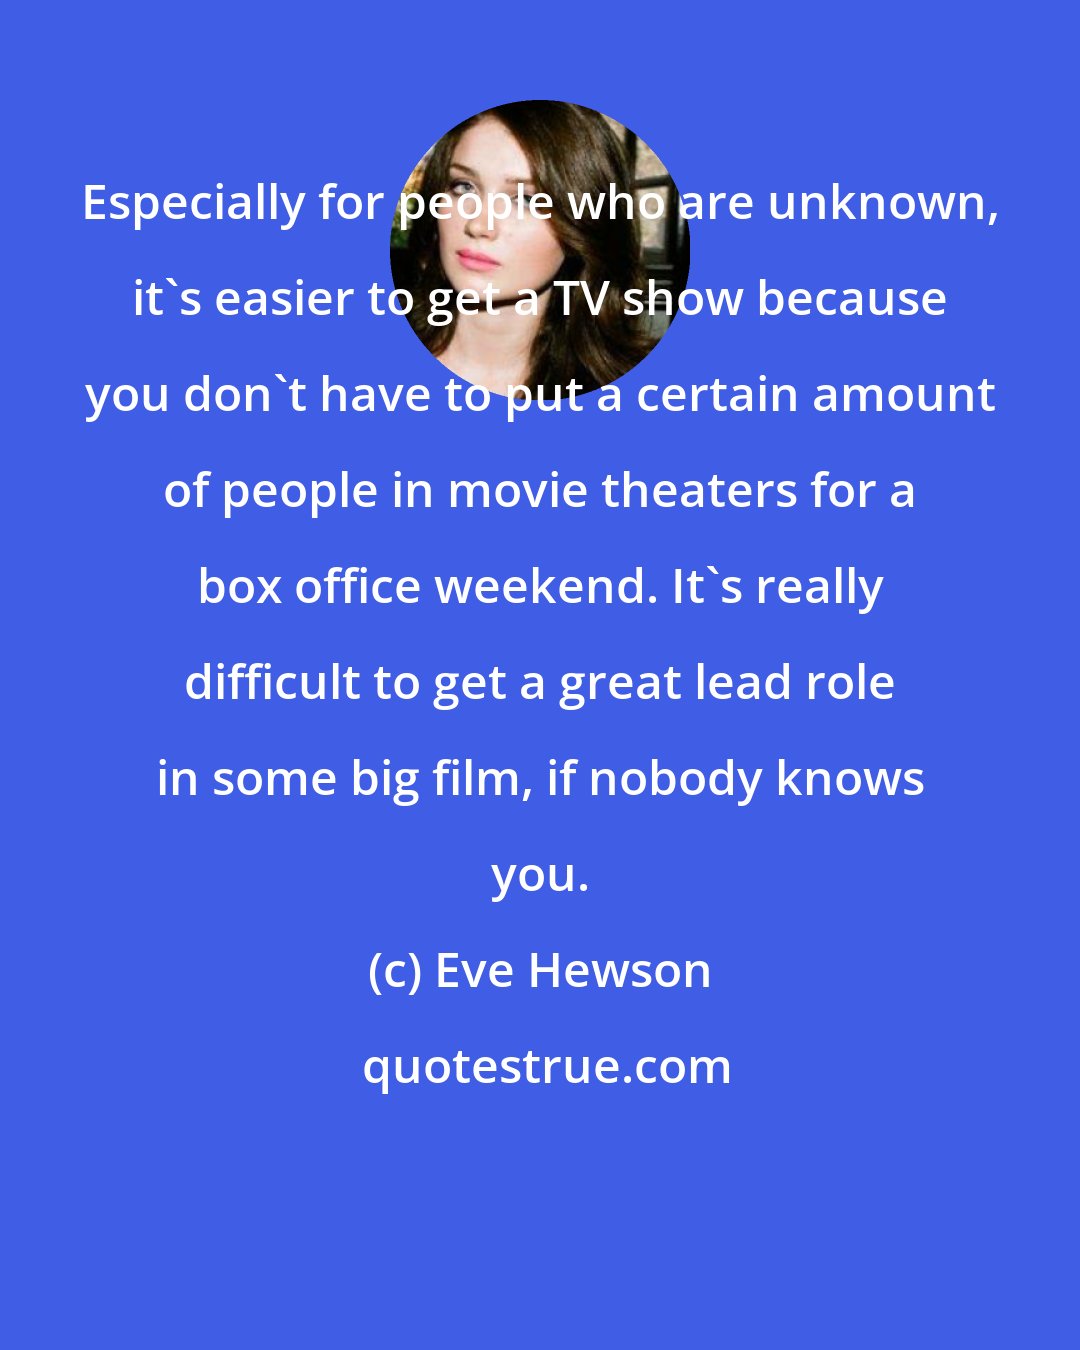 Eve Hewson: Especially for people who are unknown, it's easier to get a TV show because you don't have to put a certain amount of people in movie theaters for a box office weekend. It's really difficult to get a great lead role in some big film, if nobody knows you.